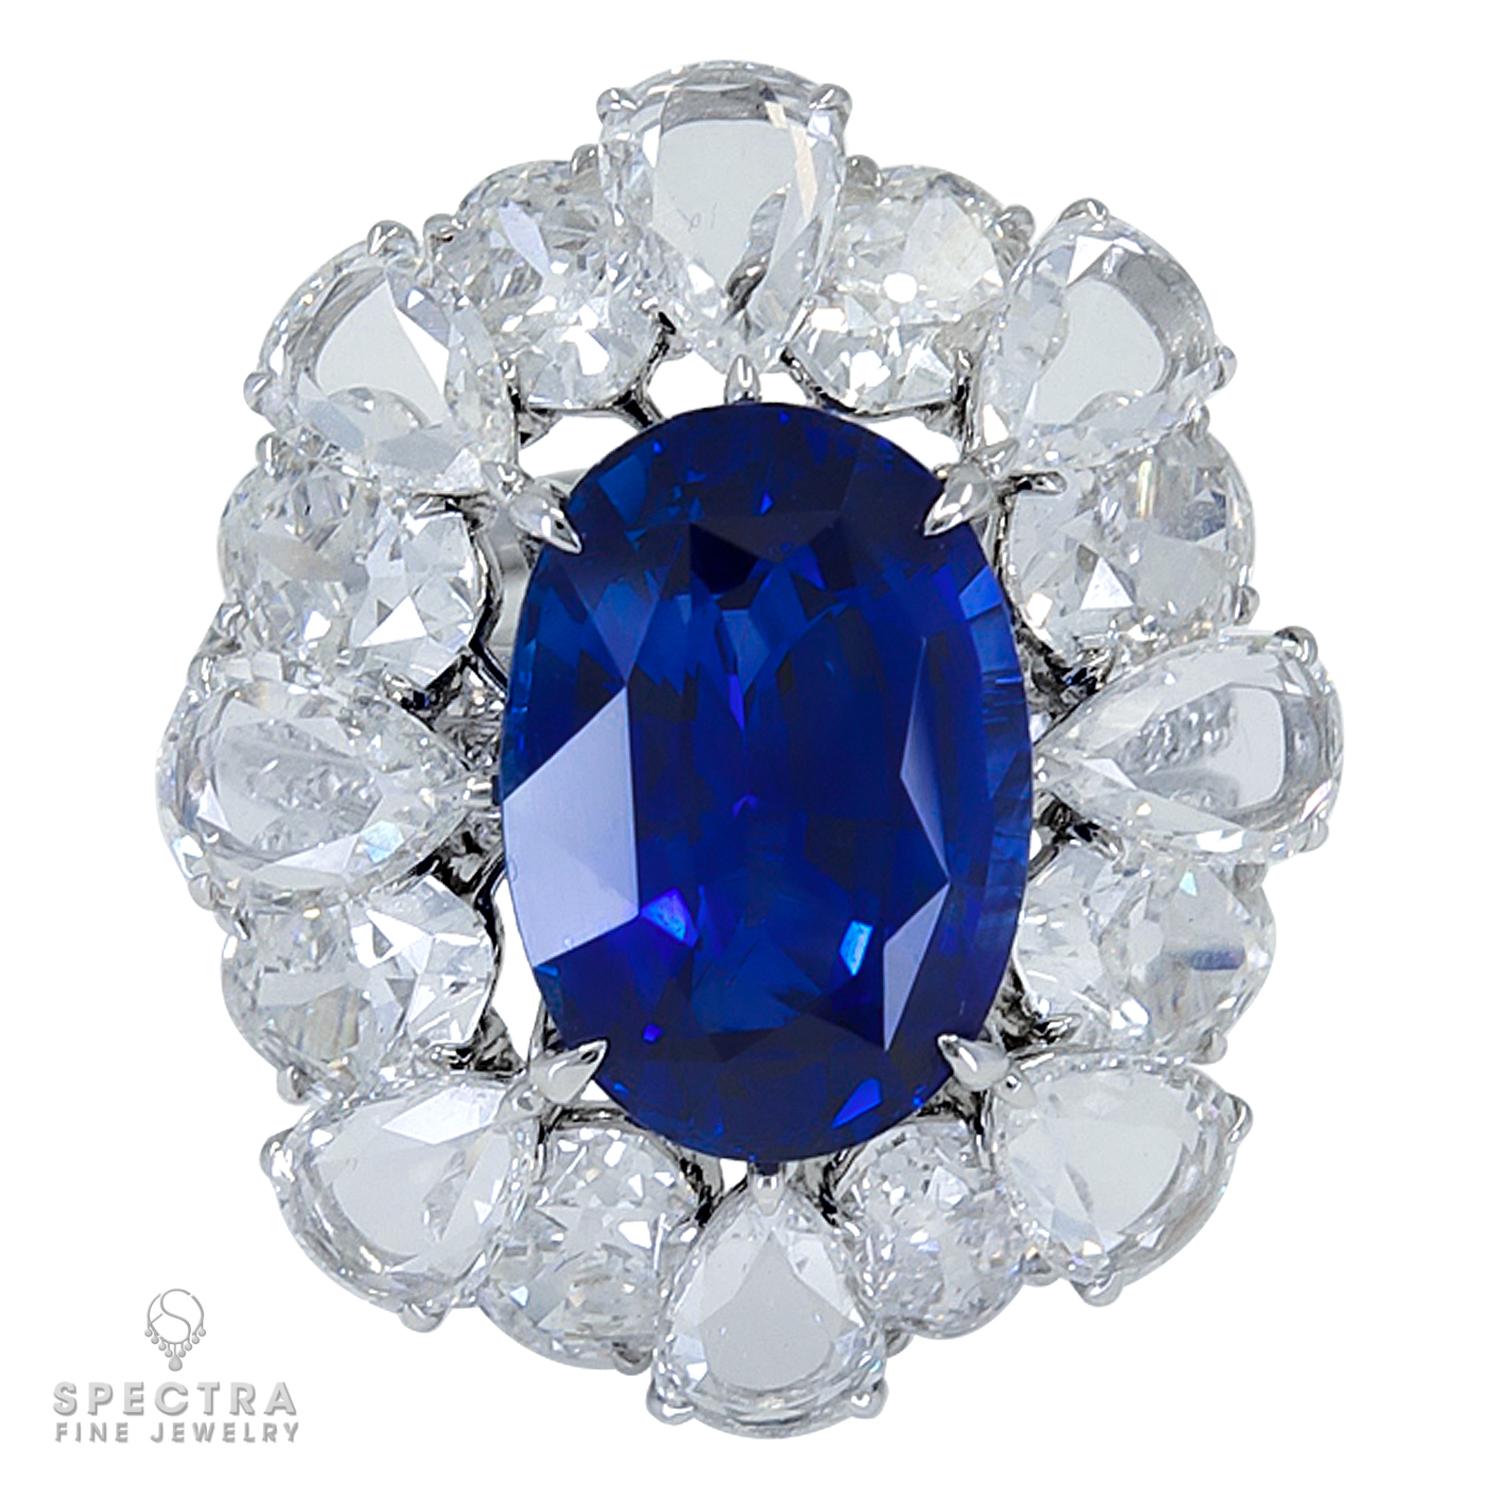 Contemporary Spectra Fine Jewelry SSEF Certified 9.01 Carat Sapphire Diamond Ring For Sale